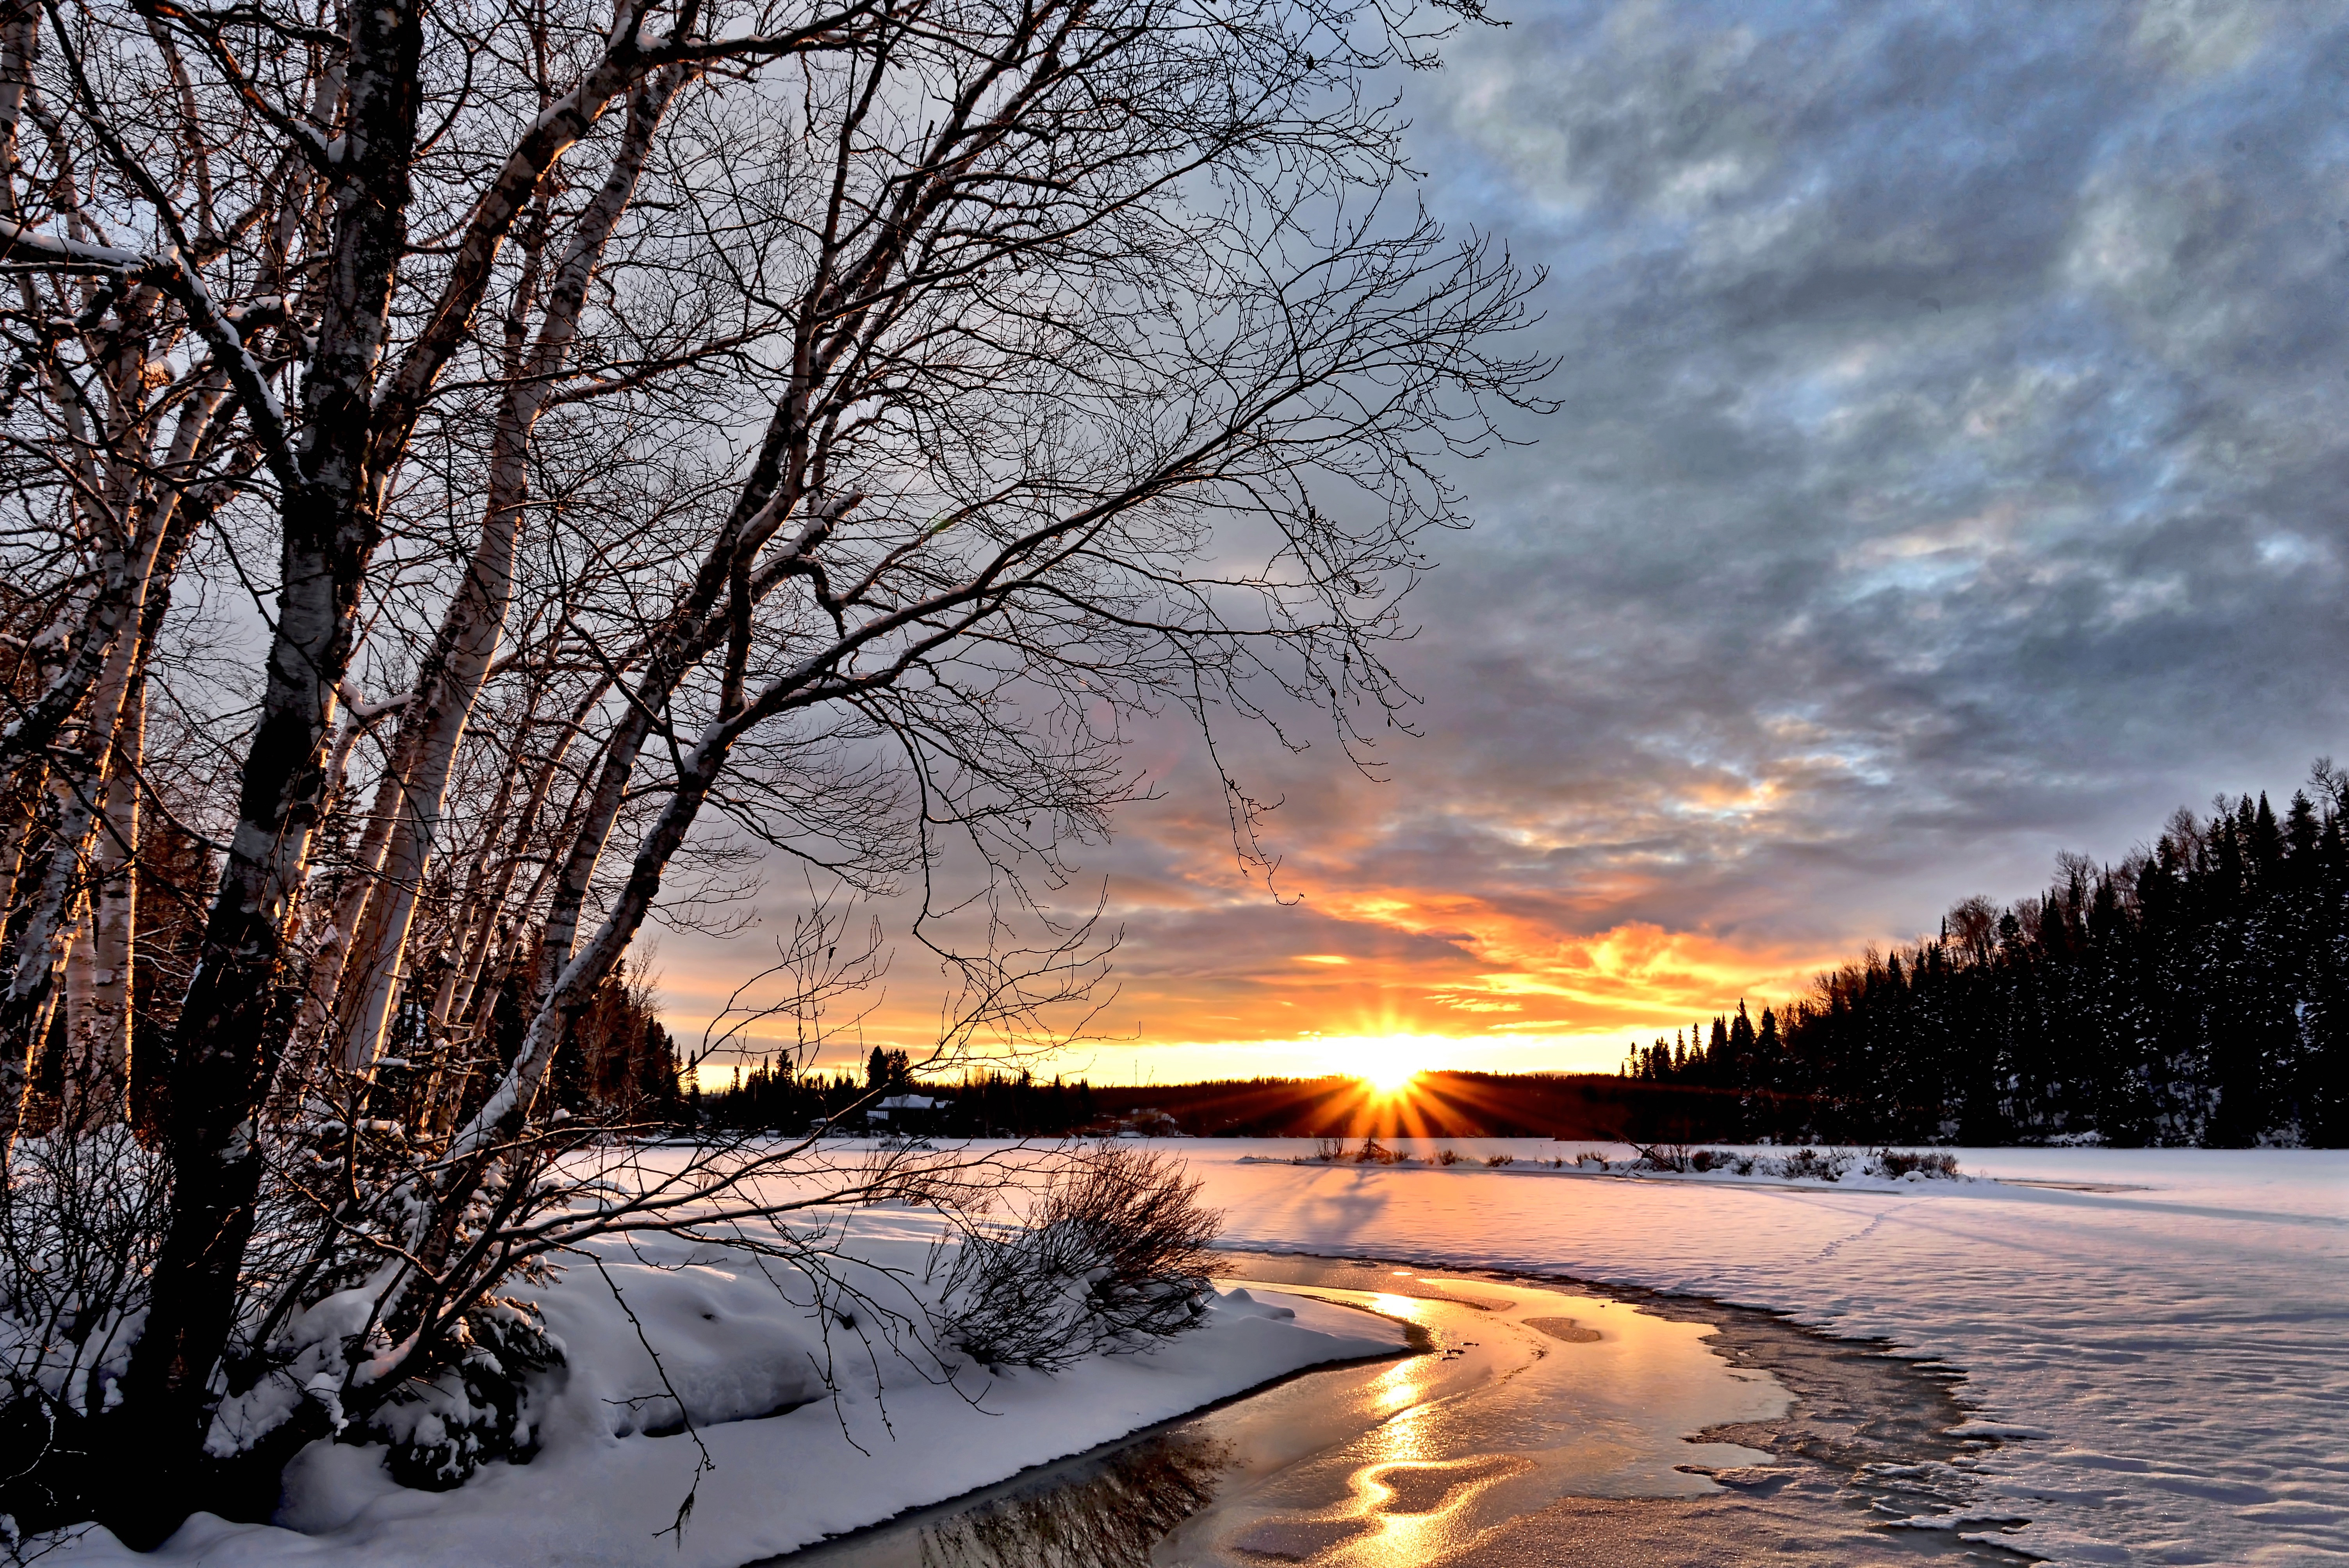 Sunset over the winter landscape with clouds image - Free stock ...